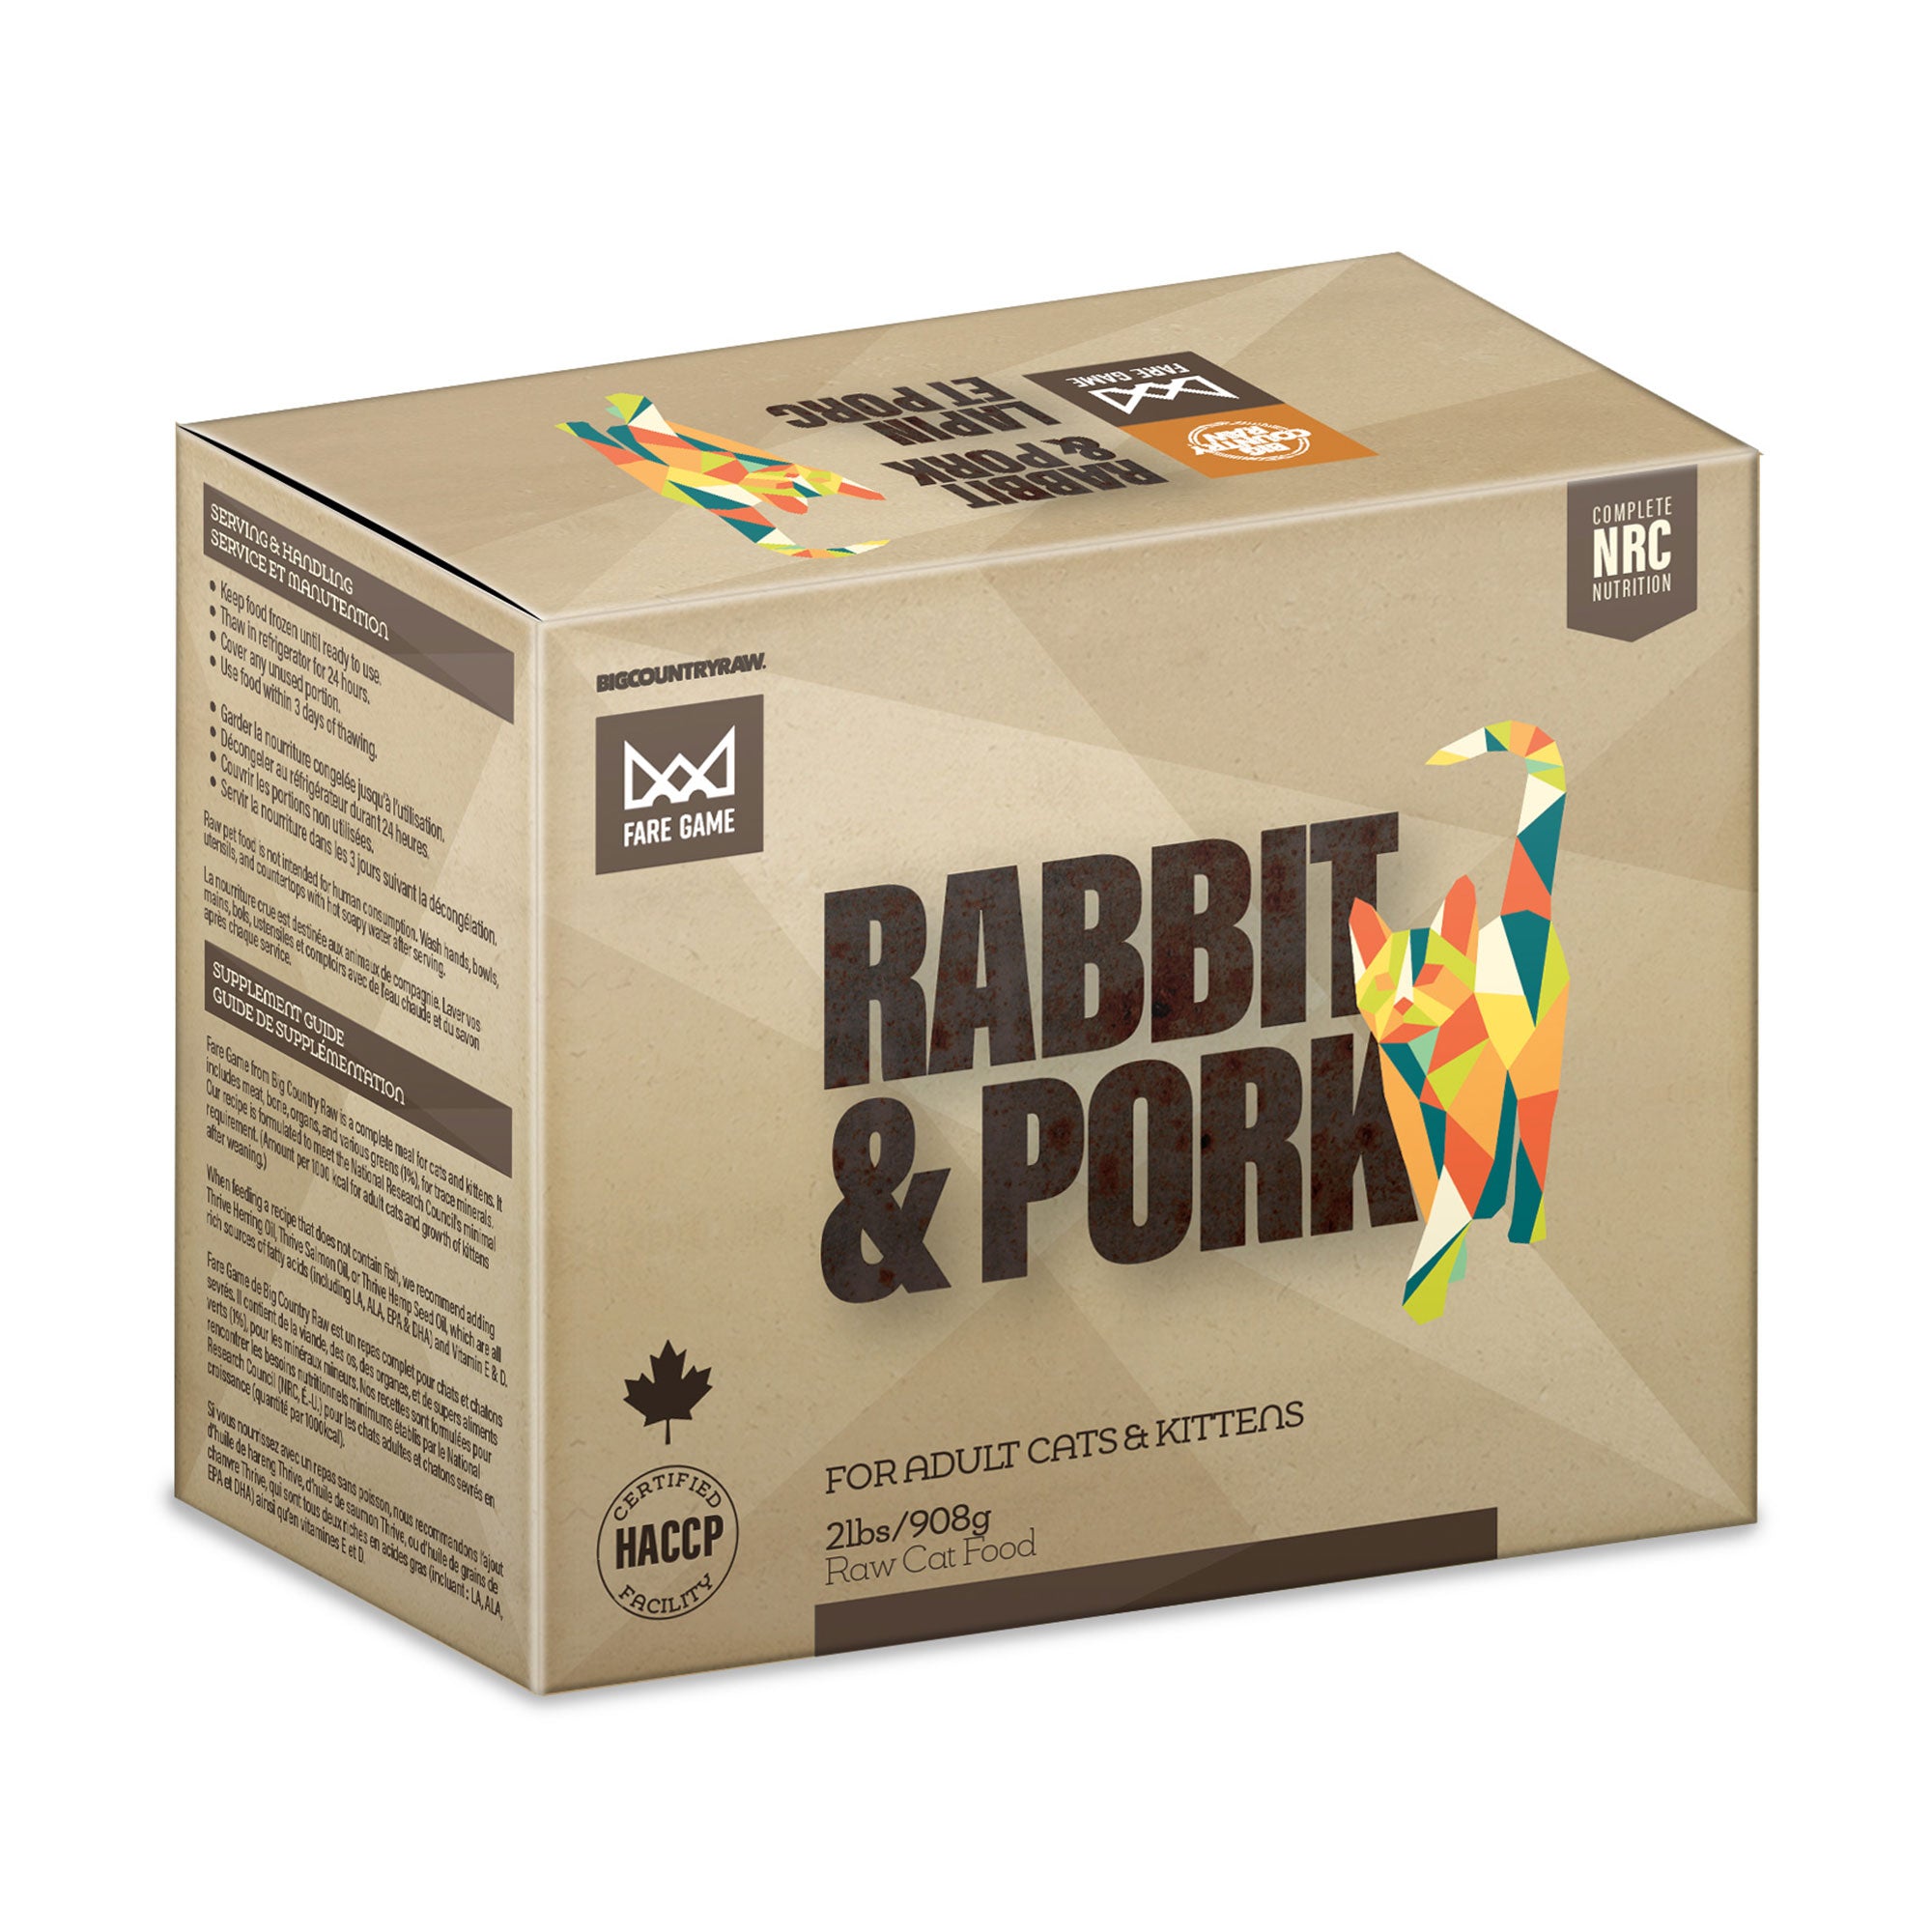 Big Country Raw | Fare Game | Rabbit with Pork (2lb) | Raw Cat Food Near Me Toronto | ARMOR THE POOCH